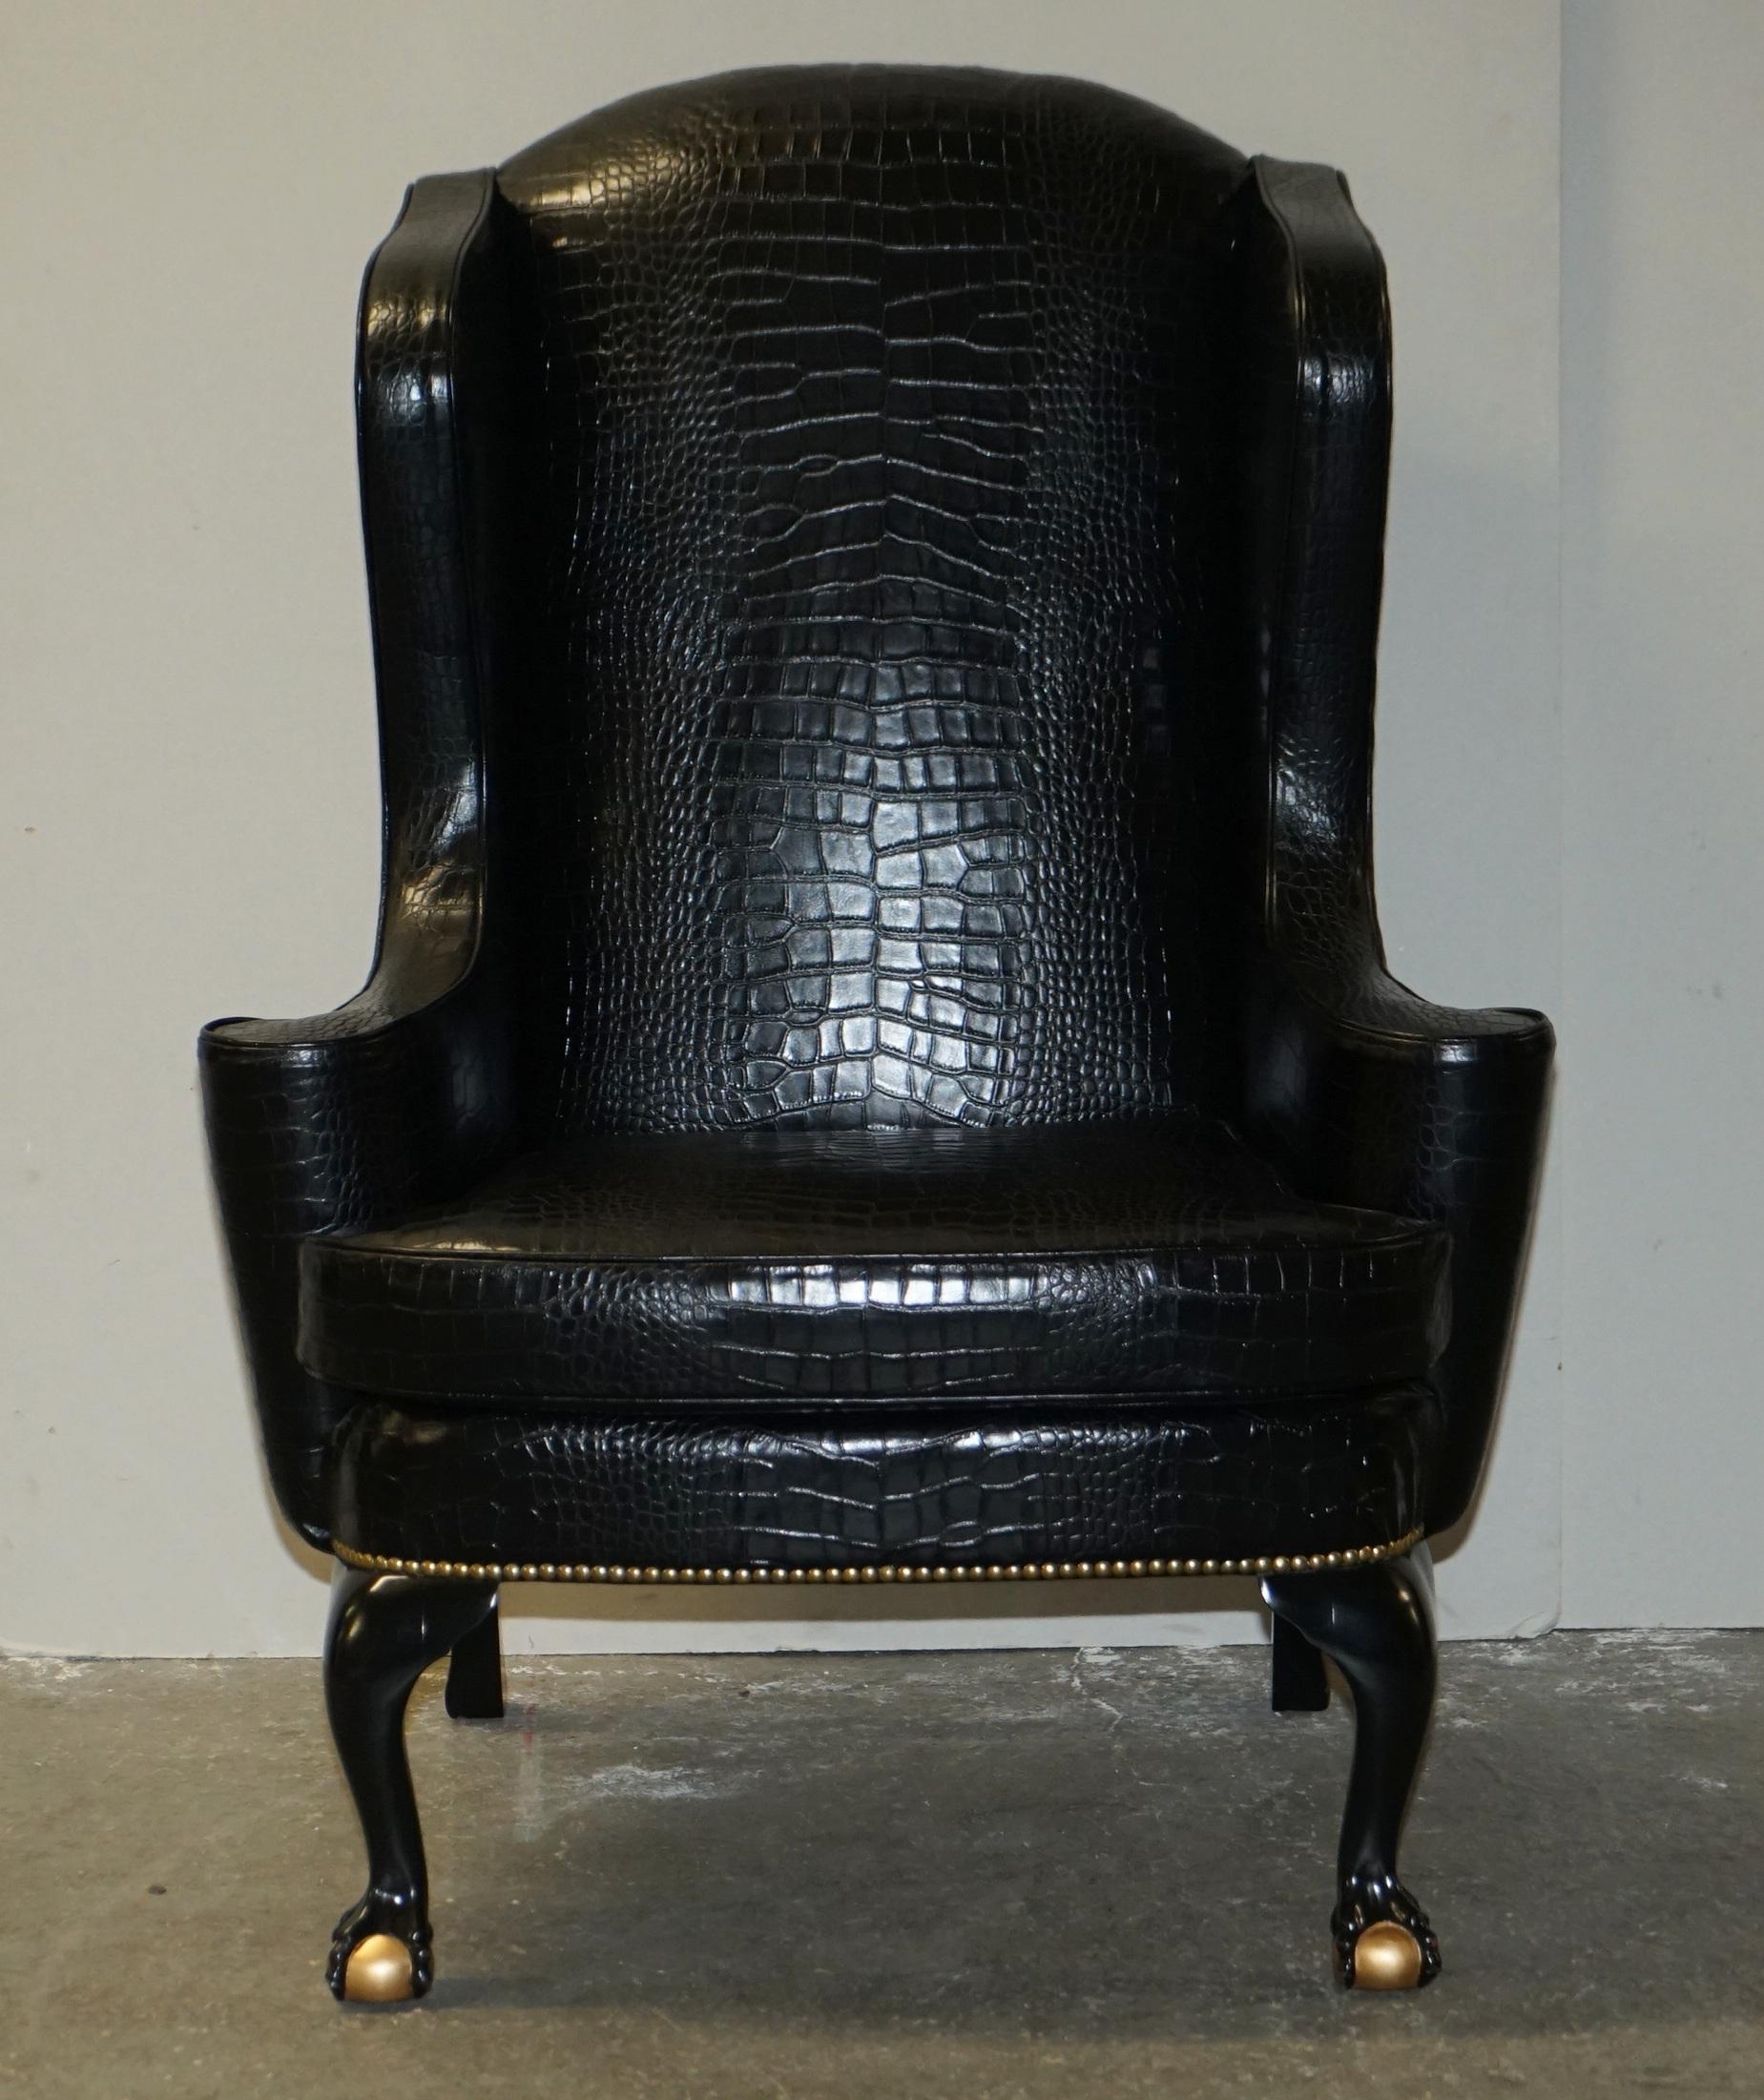 We are delighted to offer for sale this lovely Greengate Berwick Crocodile / Alligator leather wingback armchair with claw & ball cabriolet legs

A beautiful armchair, custom made for a no expense spared house fitting, this is the only one in the